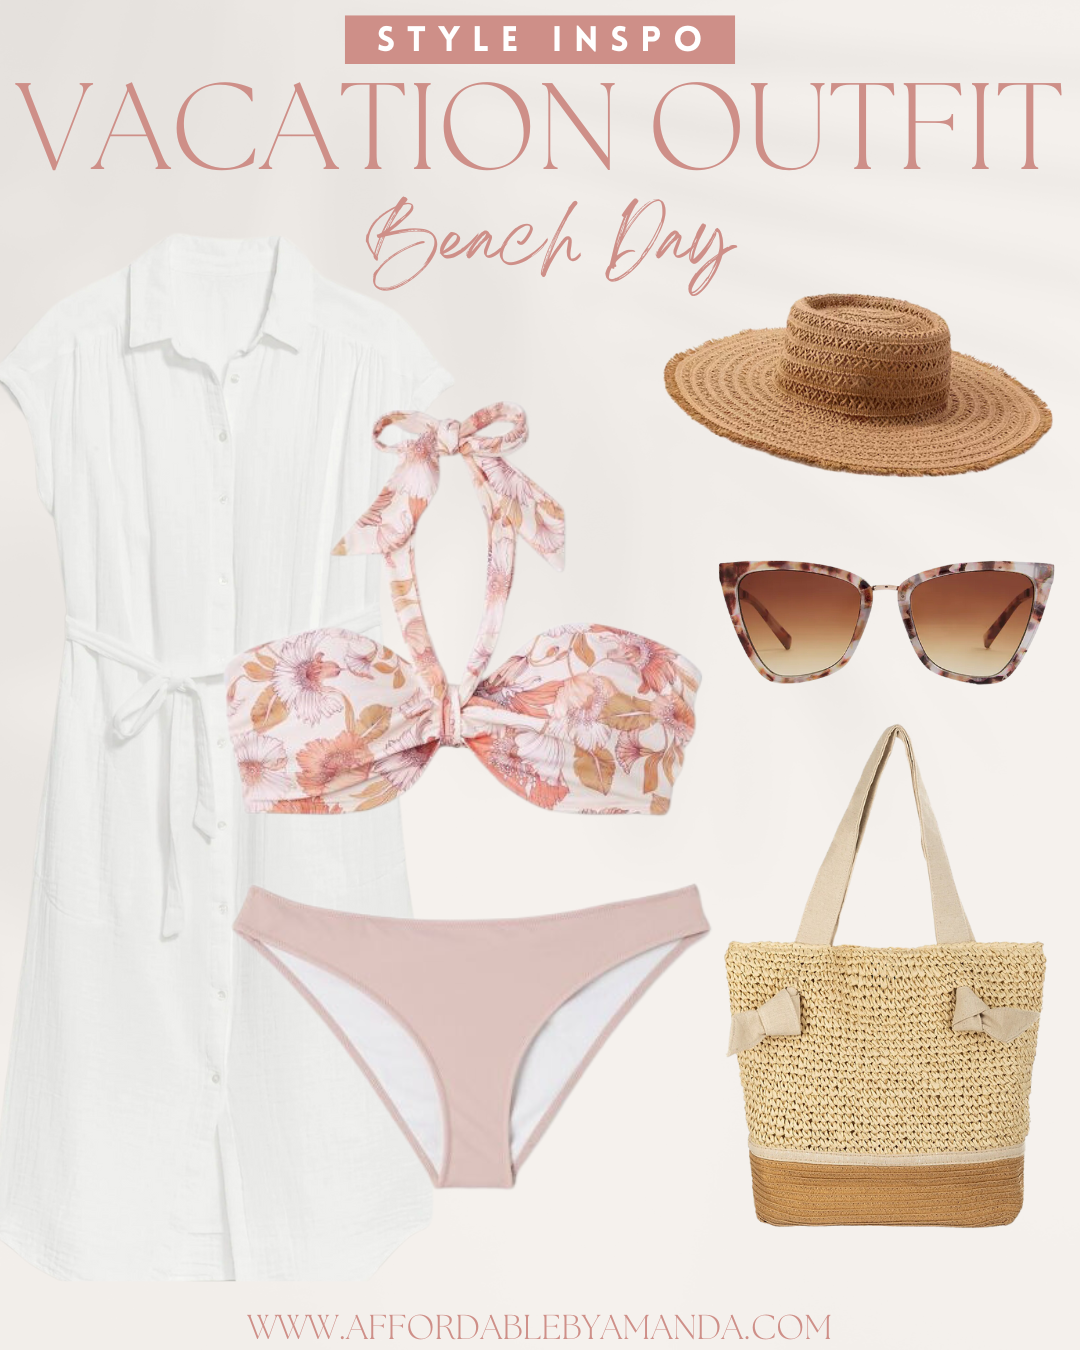 Summer Vacation Outfit Ideas - Affordable by Amanda